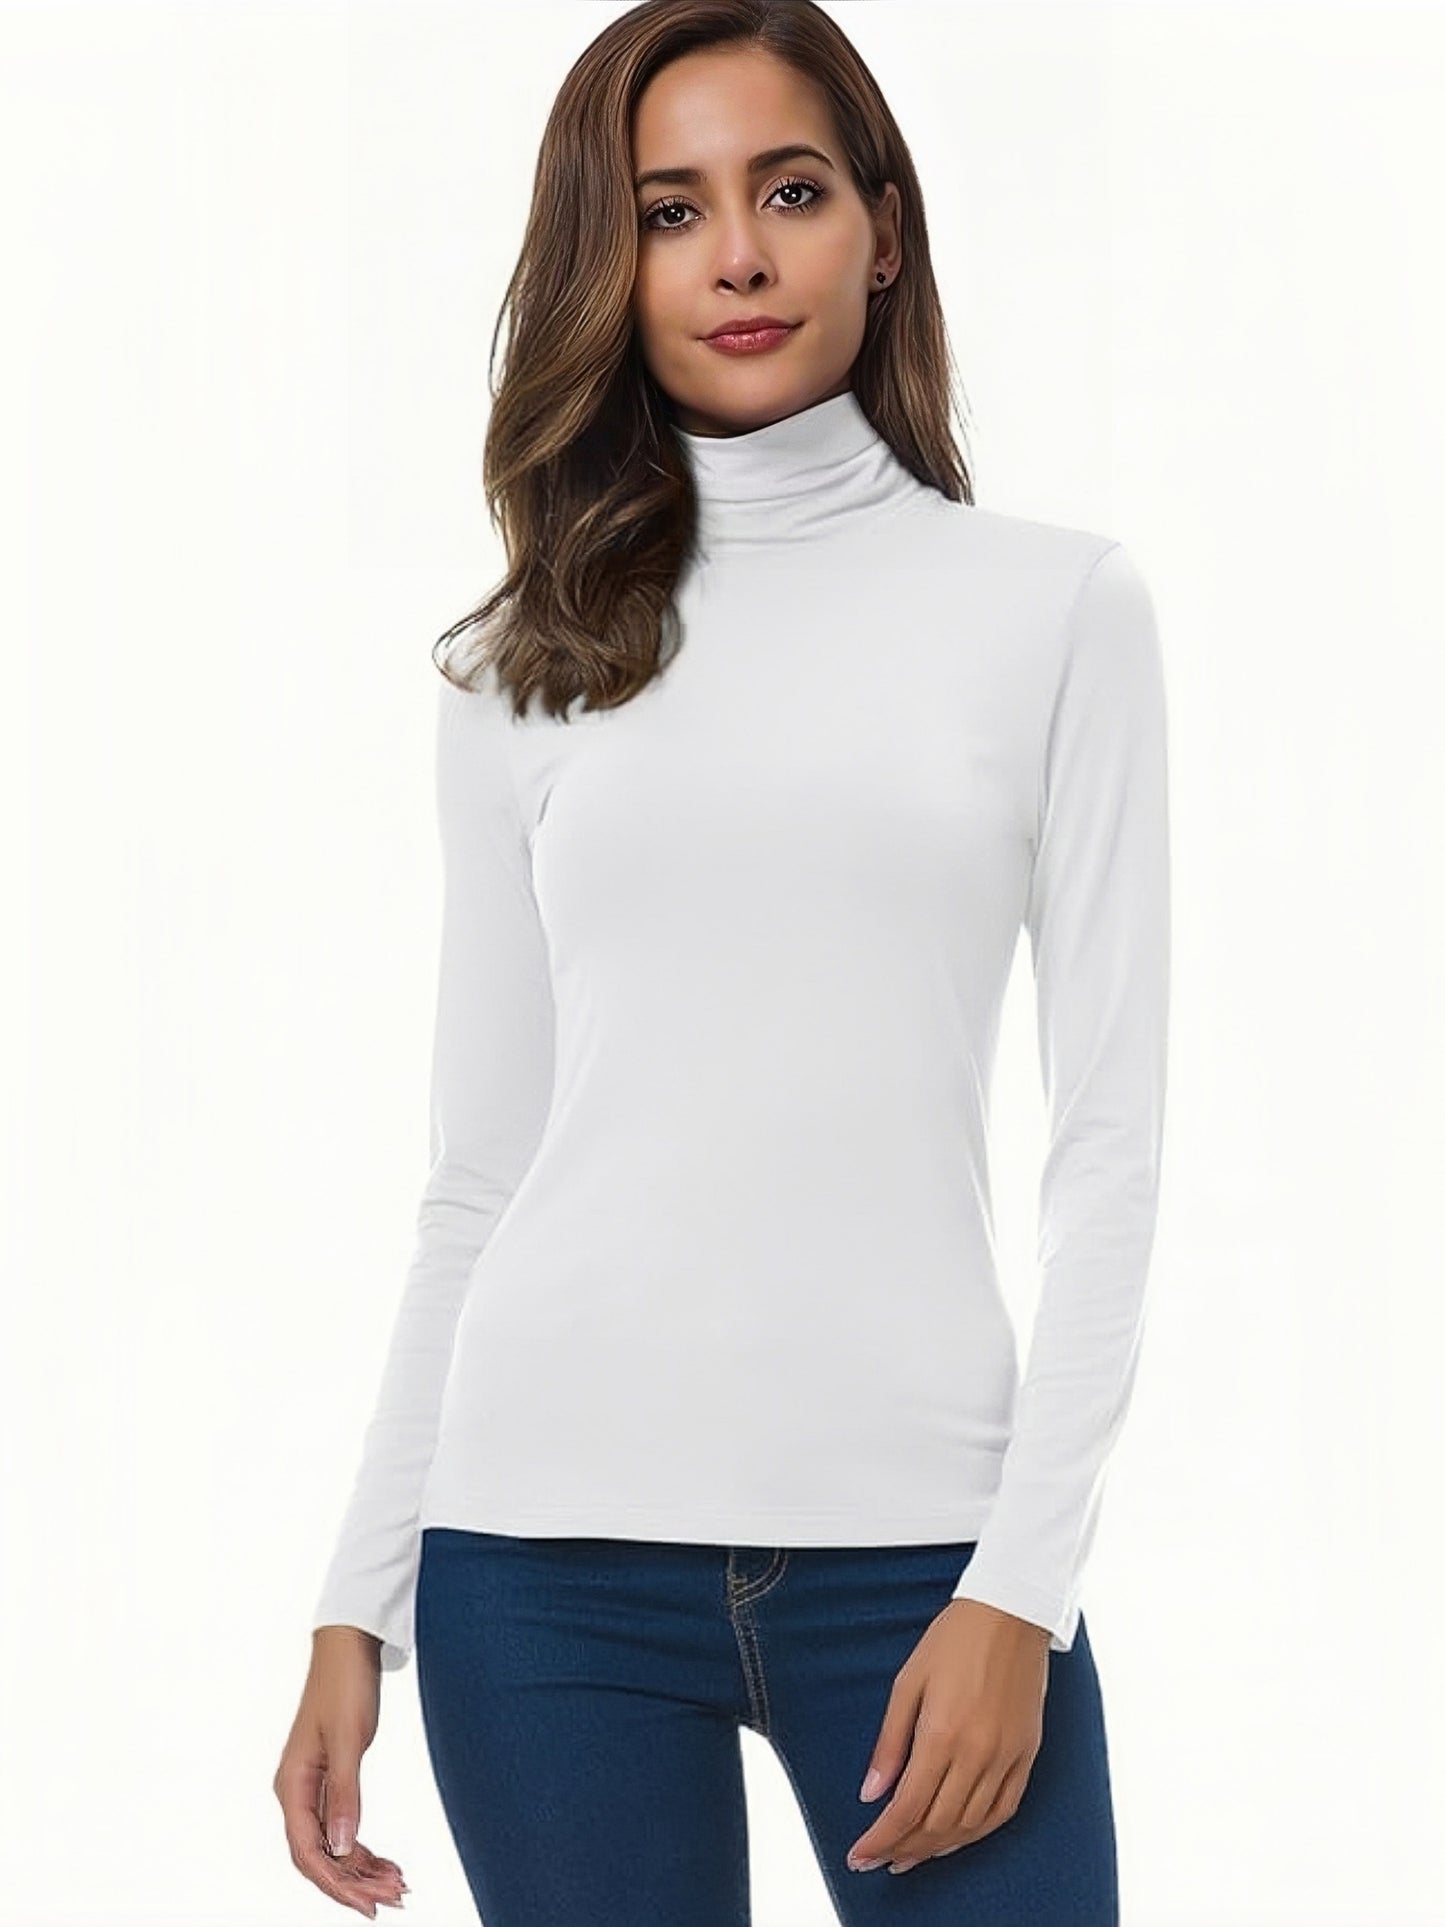 Solid 4 Packs T-shirt, Casual Long Sleeve Turtleneck T-shirt For Spring & Fall, Women's Clothing